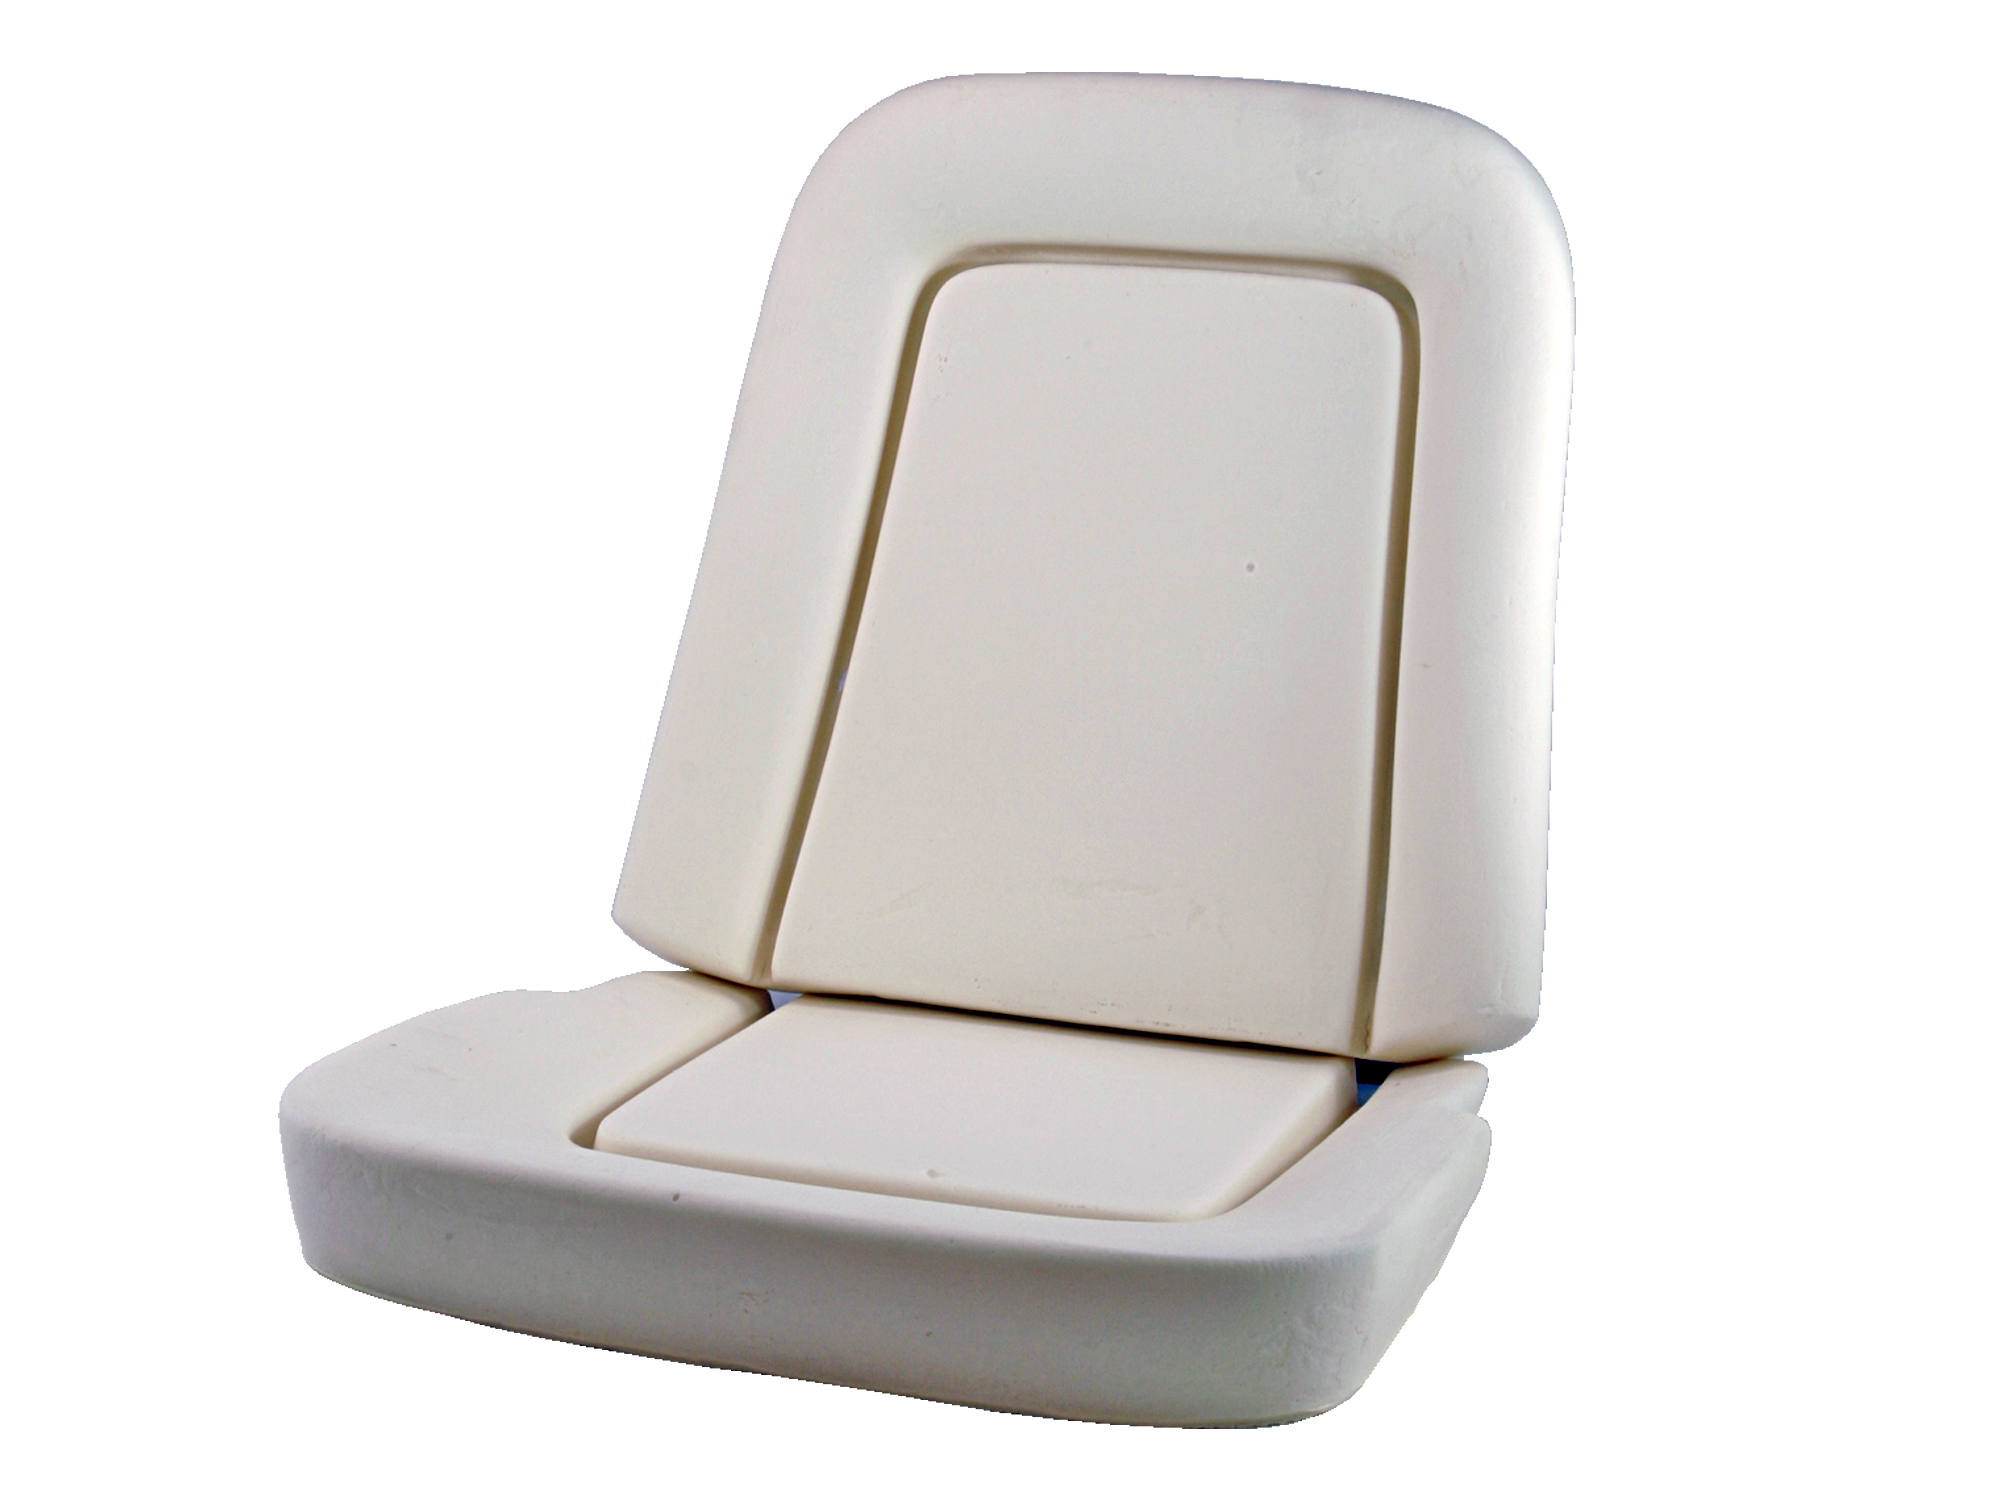 64-66 STANDARD SEAT FOAM WITH LISTING WIRES